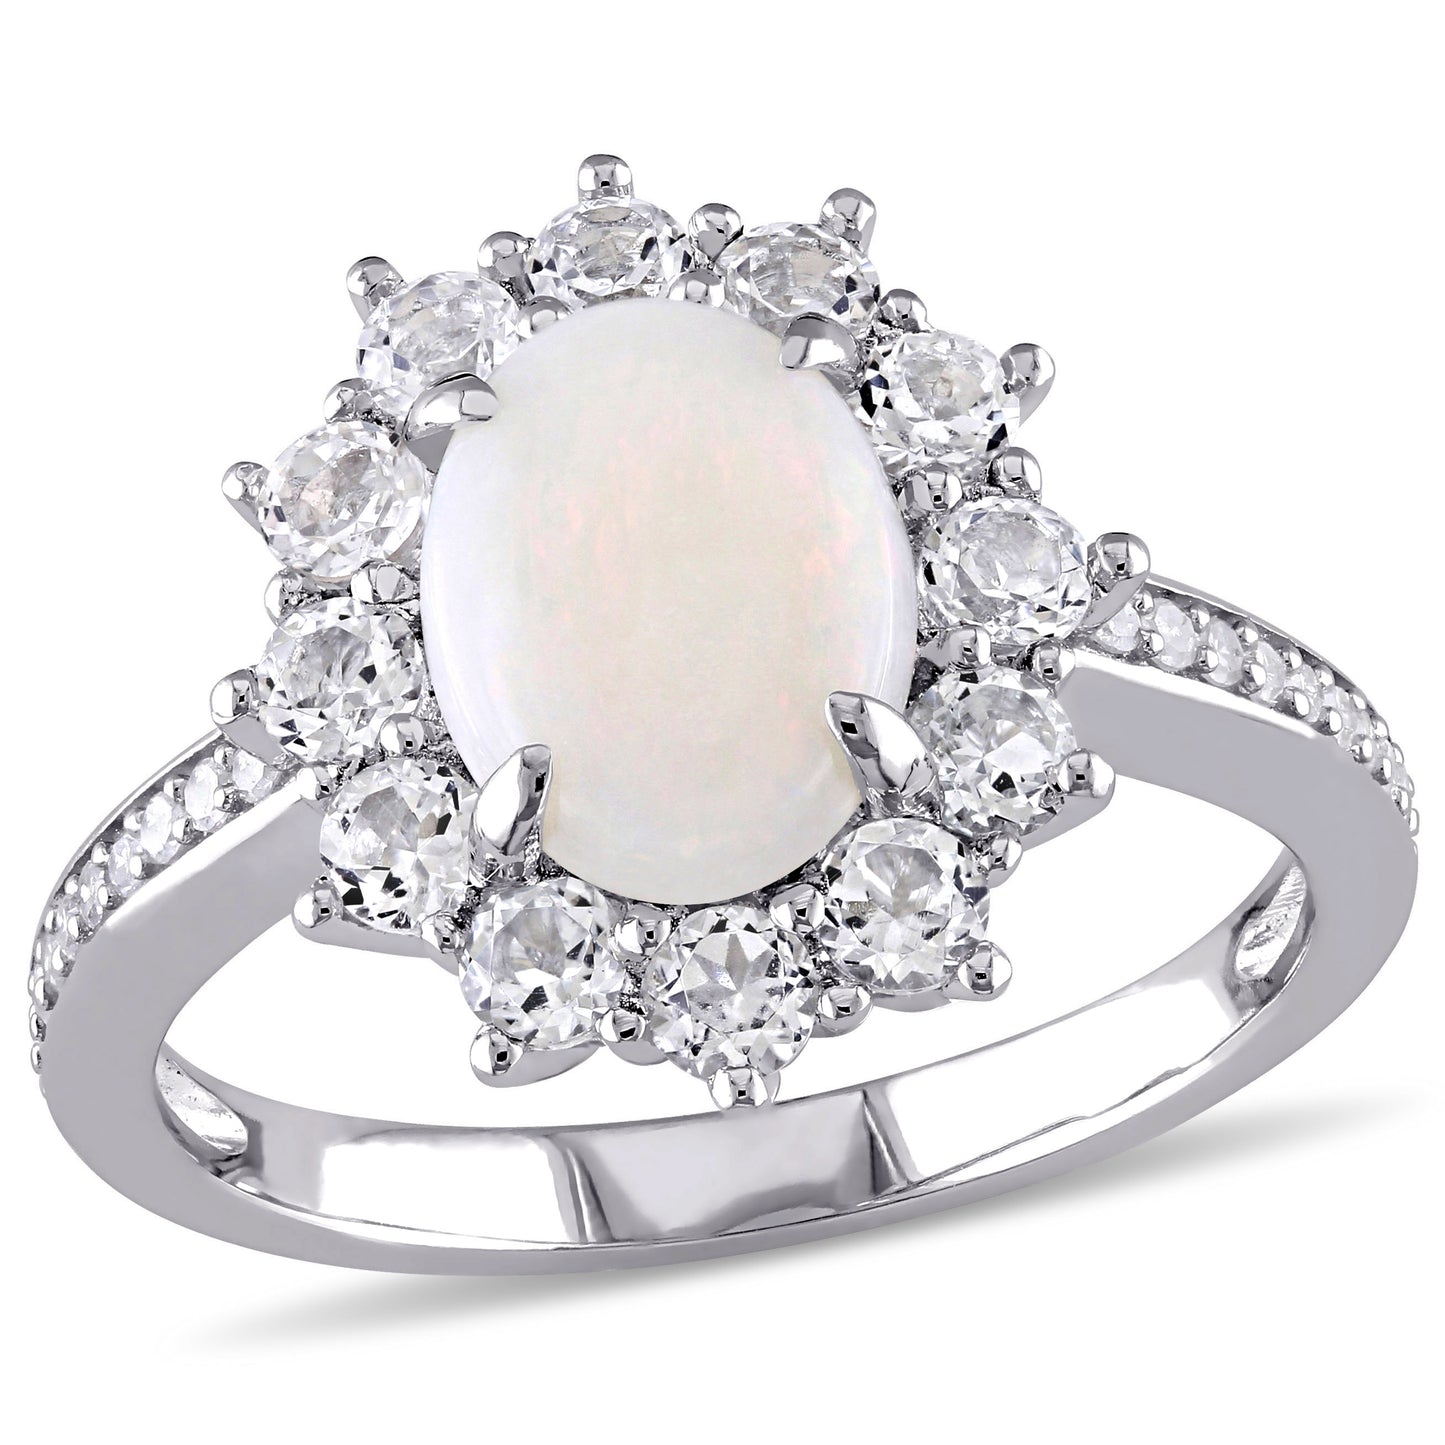 Oval Halo Opal White Topaz & Diamond Ring in Sterling Silver